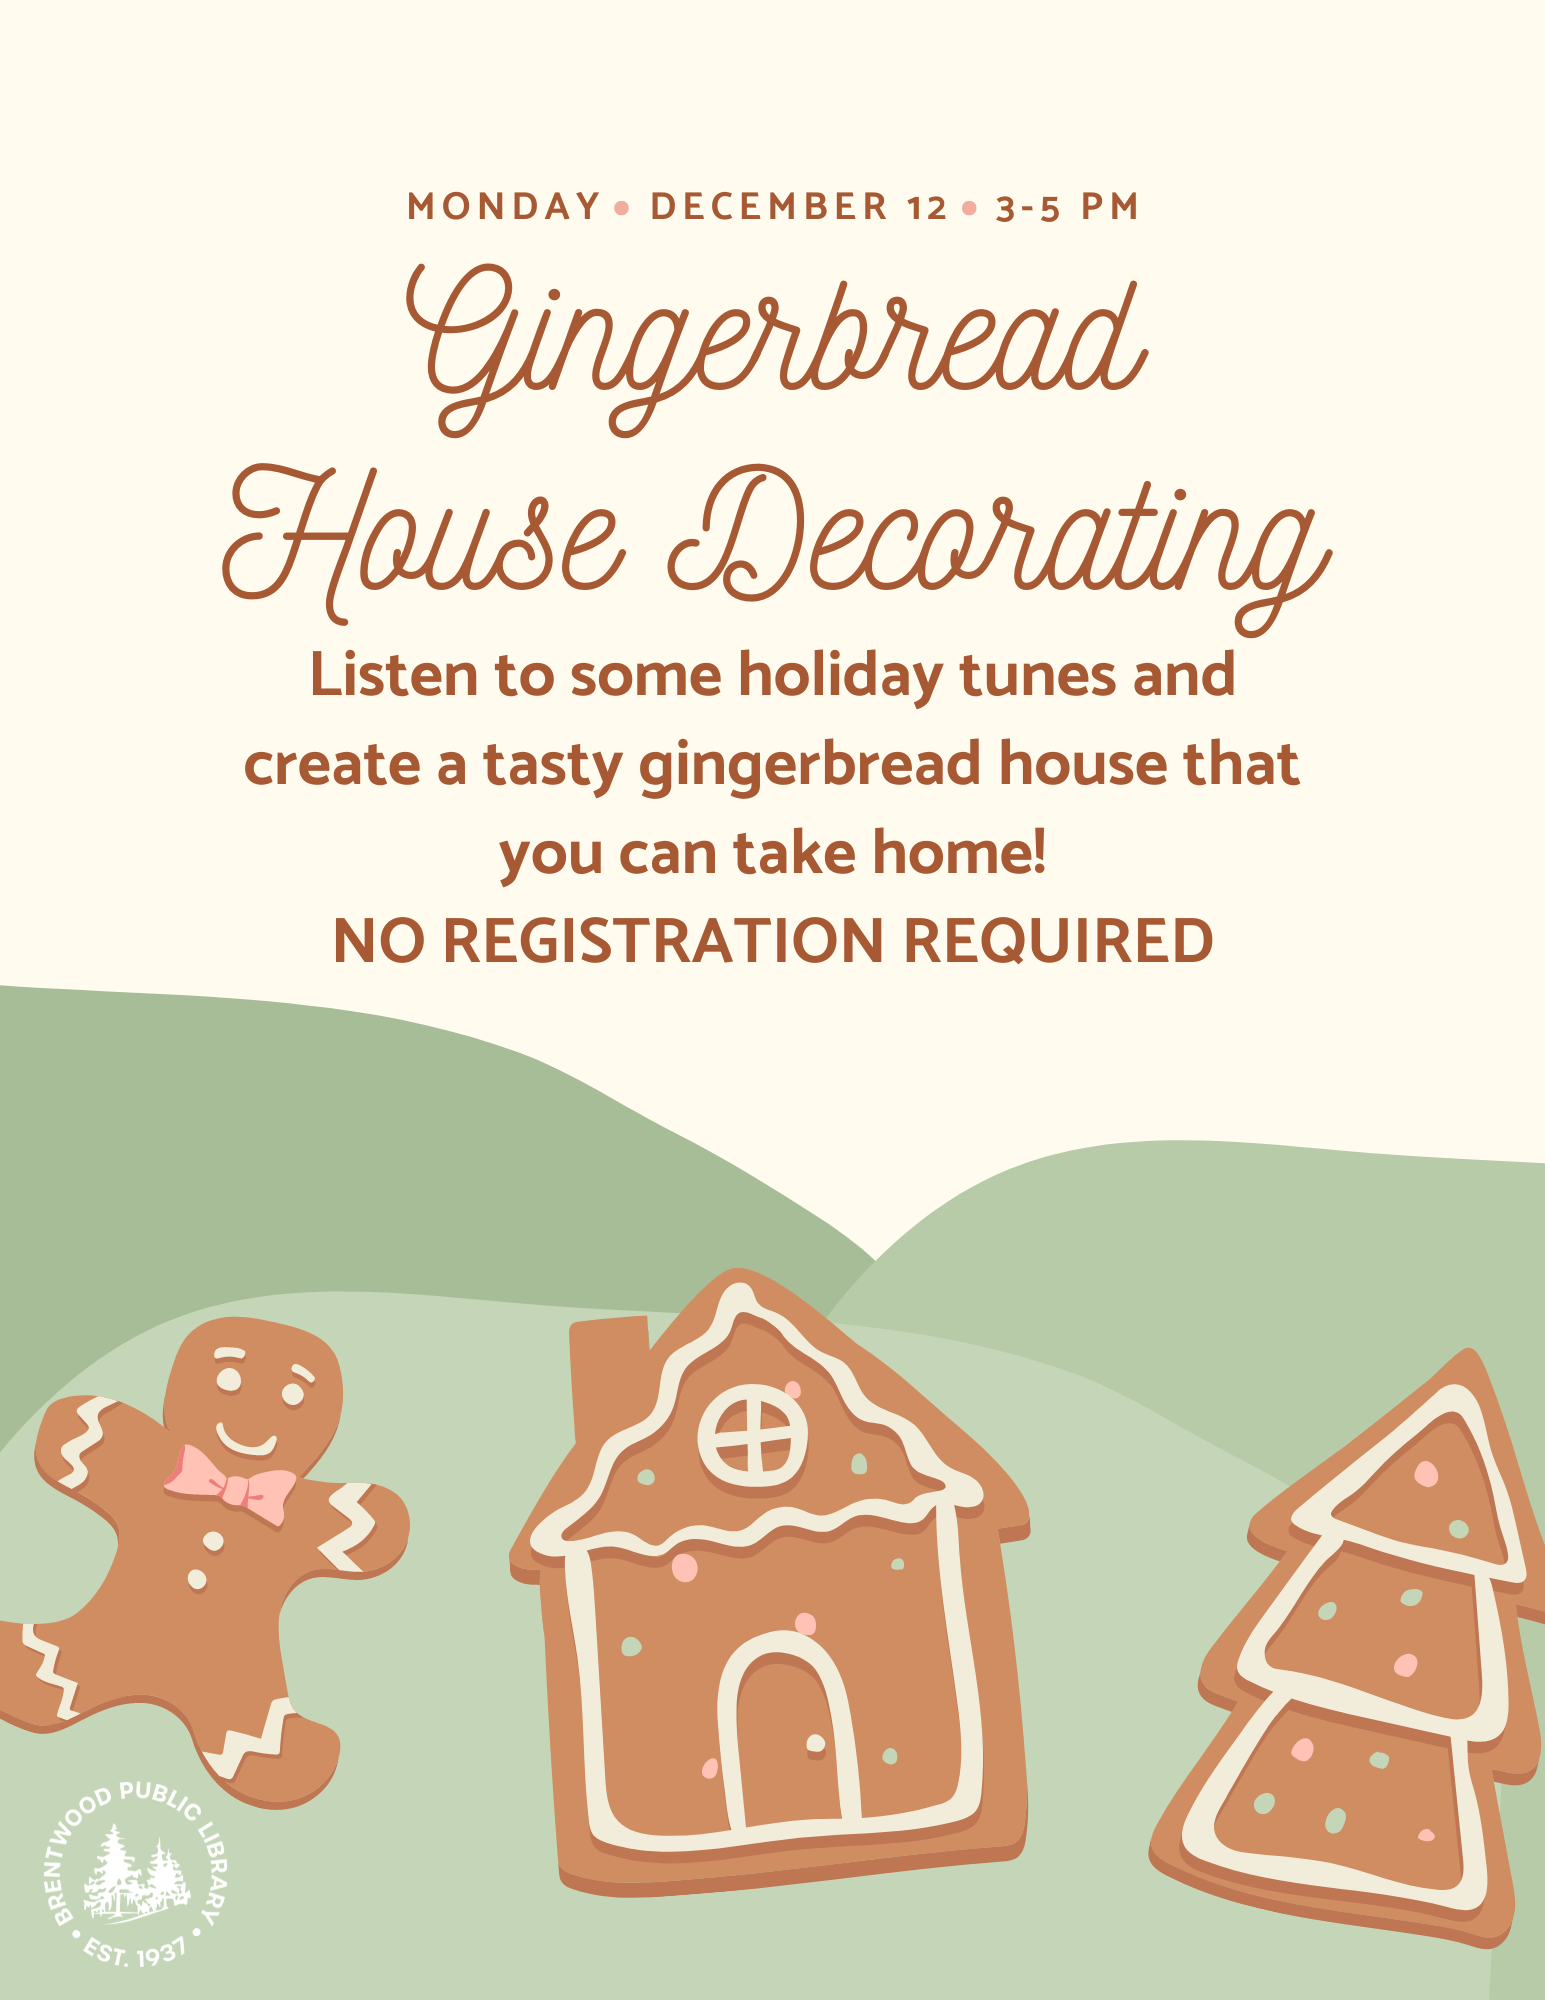 Gingerbread House Decorating 